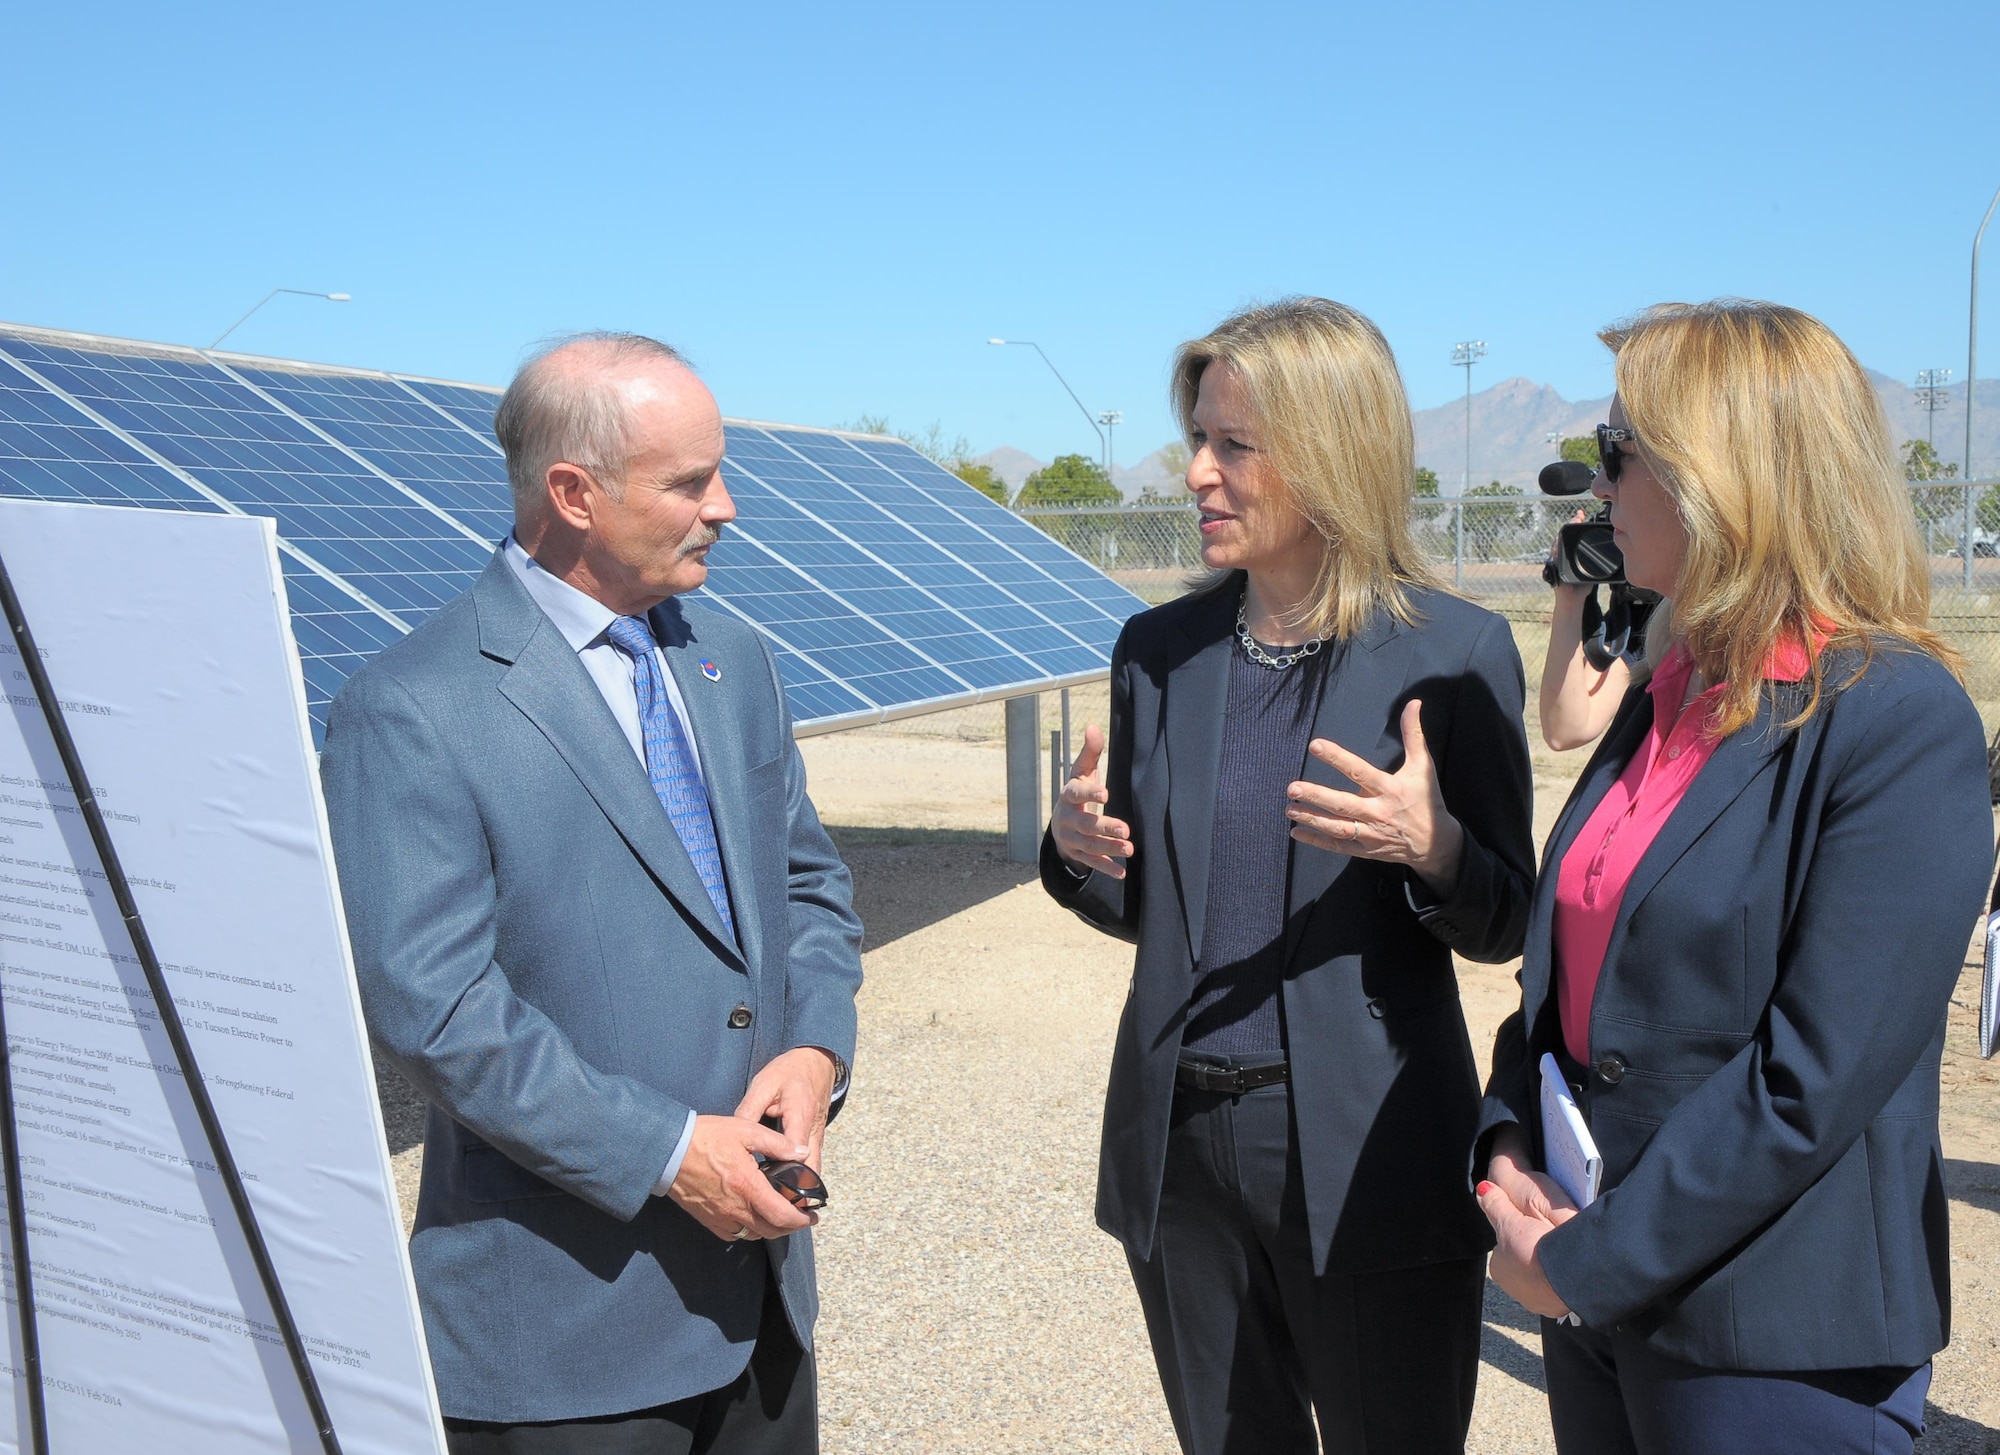 Deputy Secretary of Energy Dr. Elizabeth Sherwood-Randall and Secretary of the Air Force Deborah Lee James speak with Greg Noble, 355th Civil Engineering Squadron base energy manager, at Davis-Monthan Air Force Base, Ariz., March 9, 2016. Noble briefed Sherwood-Randall and James about D-M AFB’s solar array, the 2nd largest in the U.S. Air Force. Sherwood-Randall and James reviewed D-M AFB’s operations and discussed significant contributions to efficient energy use. (U.S. Air Fore photo by Airman 1st Class Mya Crosby/Released)